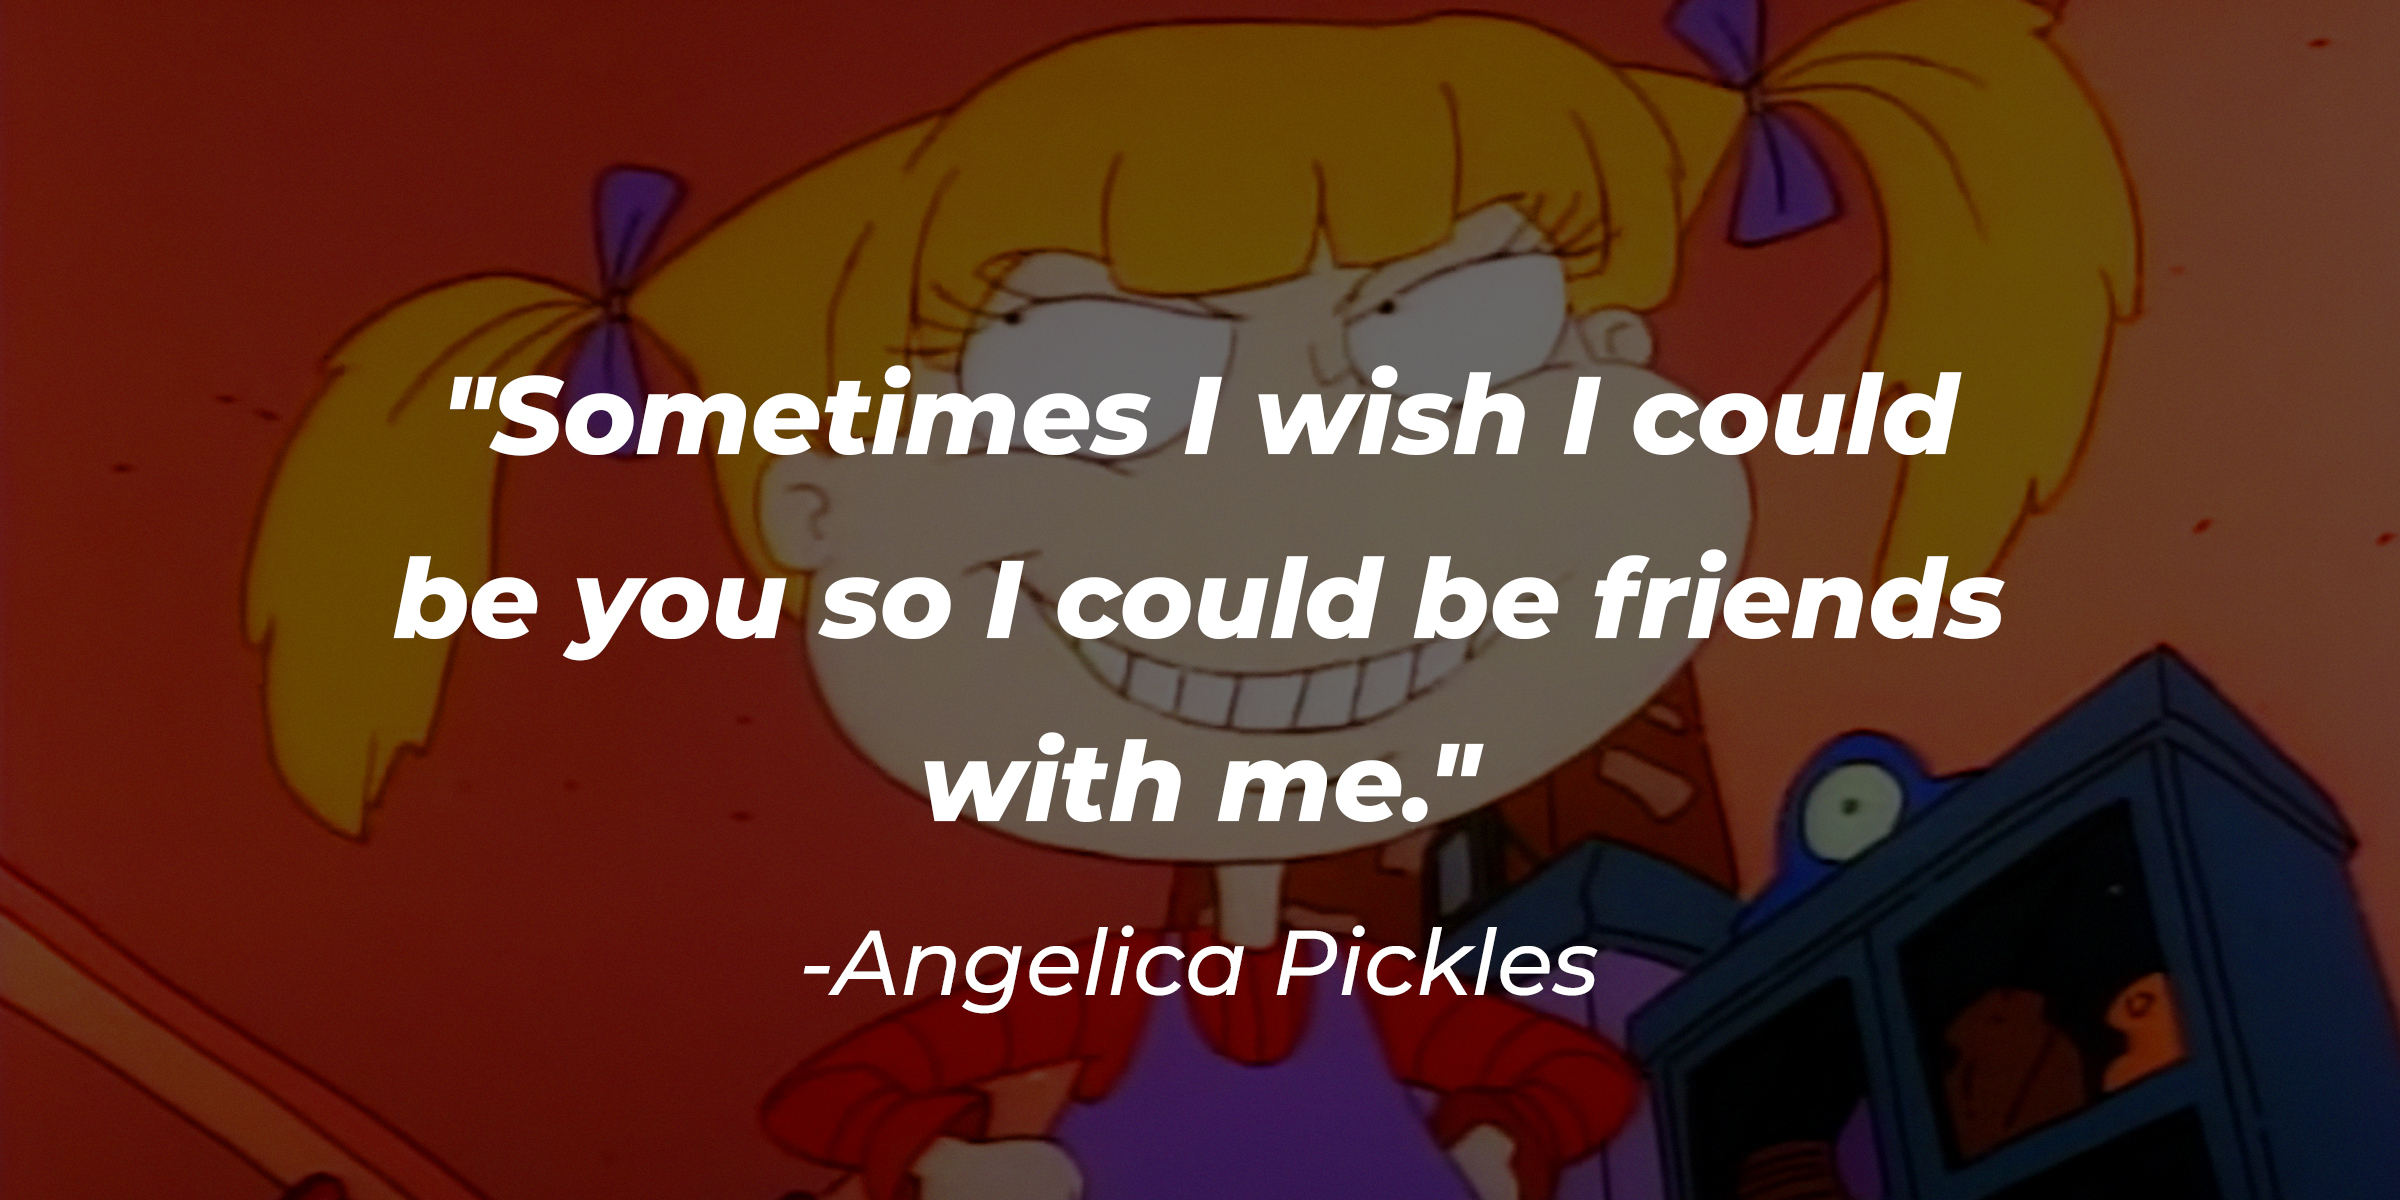 Angelica Pickles’ quote: "Sometimes I wish I could be you so I could be friends with me." | Source: Facebook/Rugrats